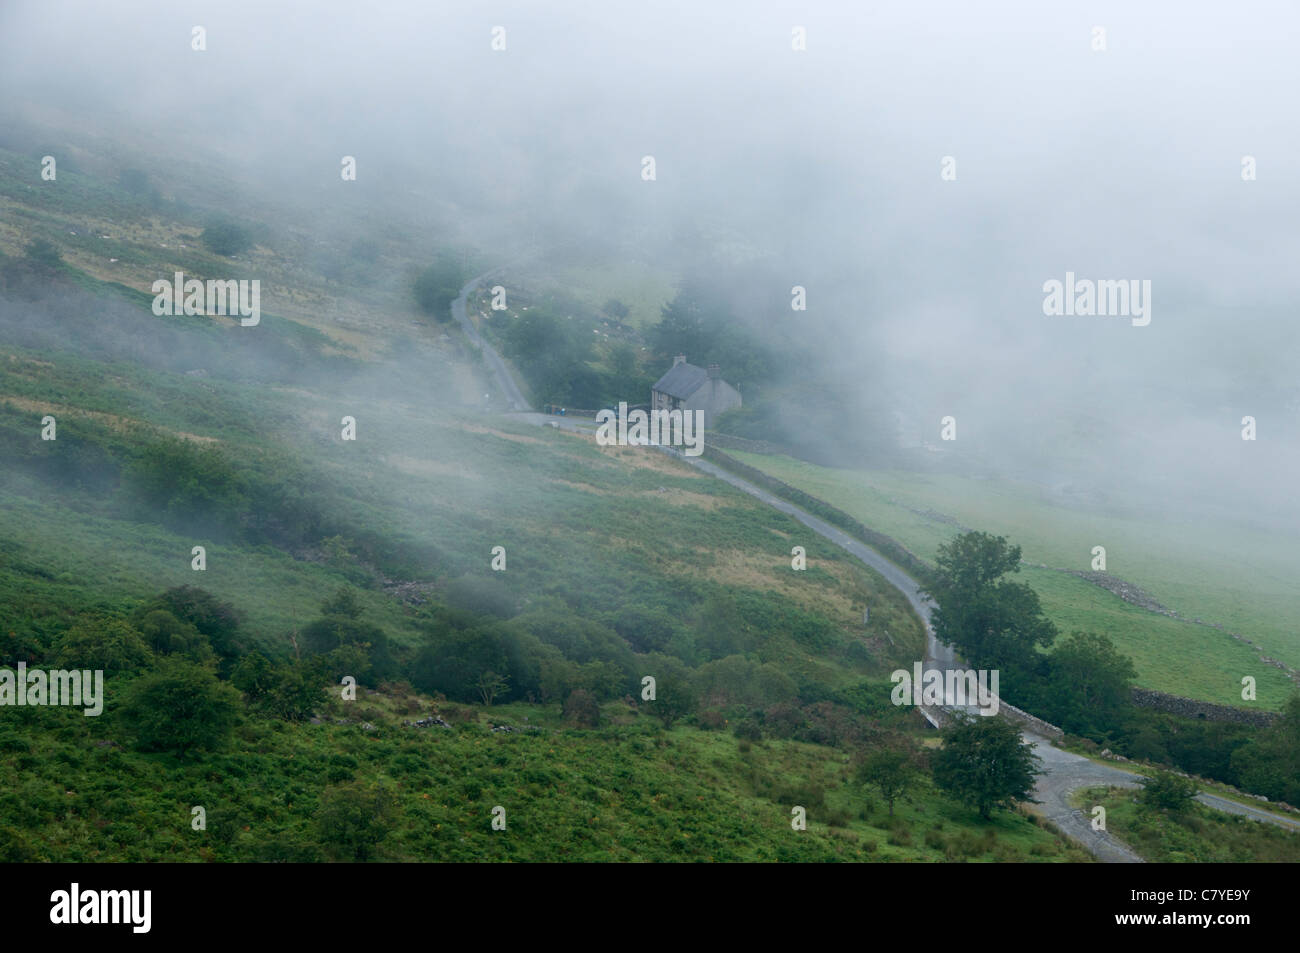 Traditional Farmhouse surrounded by fog in the Nantgwynant Valley, Snowdonia National Park, North Wales, UK Stock Photo